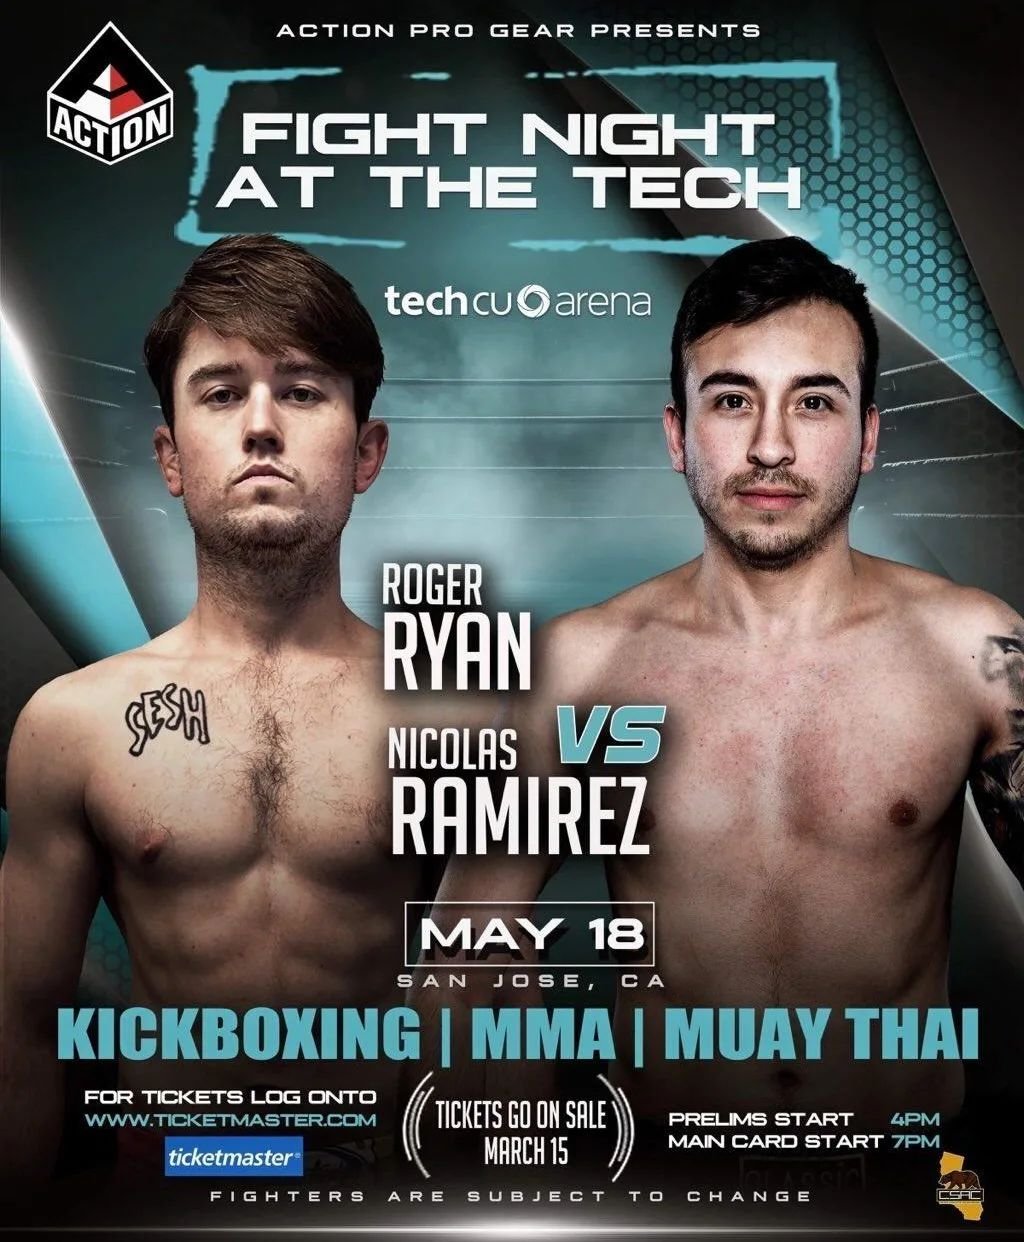 Next up! 

@rogerryan415 is having his 2nd amateur bout on @fightnightatthetech in San Jose May 18th.

Tickets available through the link in Rogers bio.
Come down and support the team and this show. 

The more support we get the better options we hav